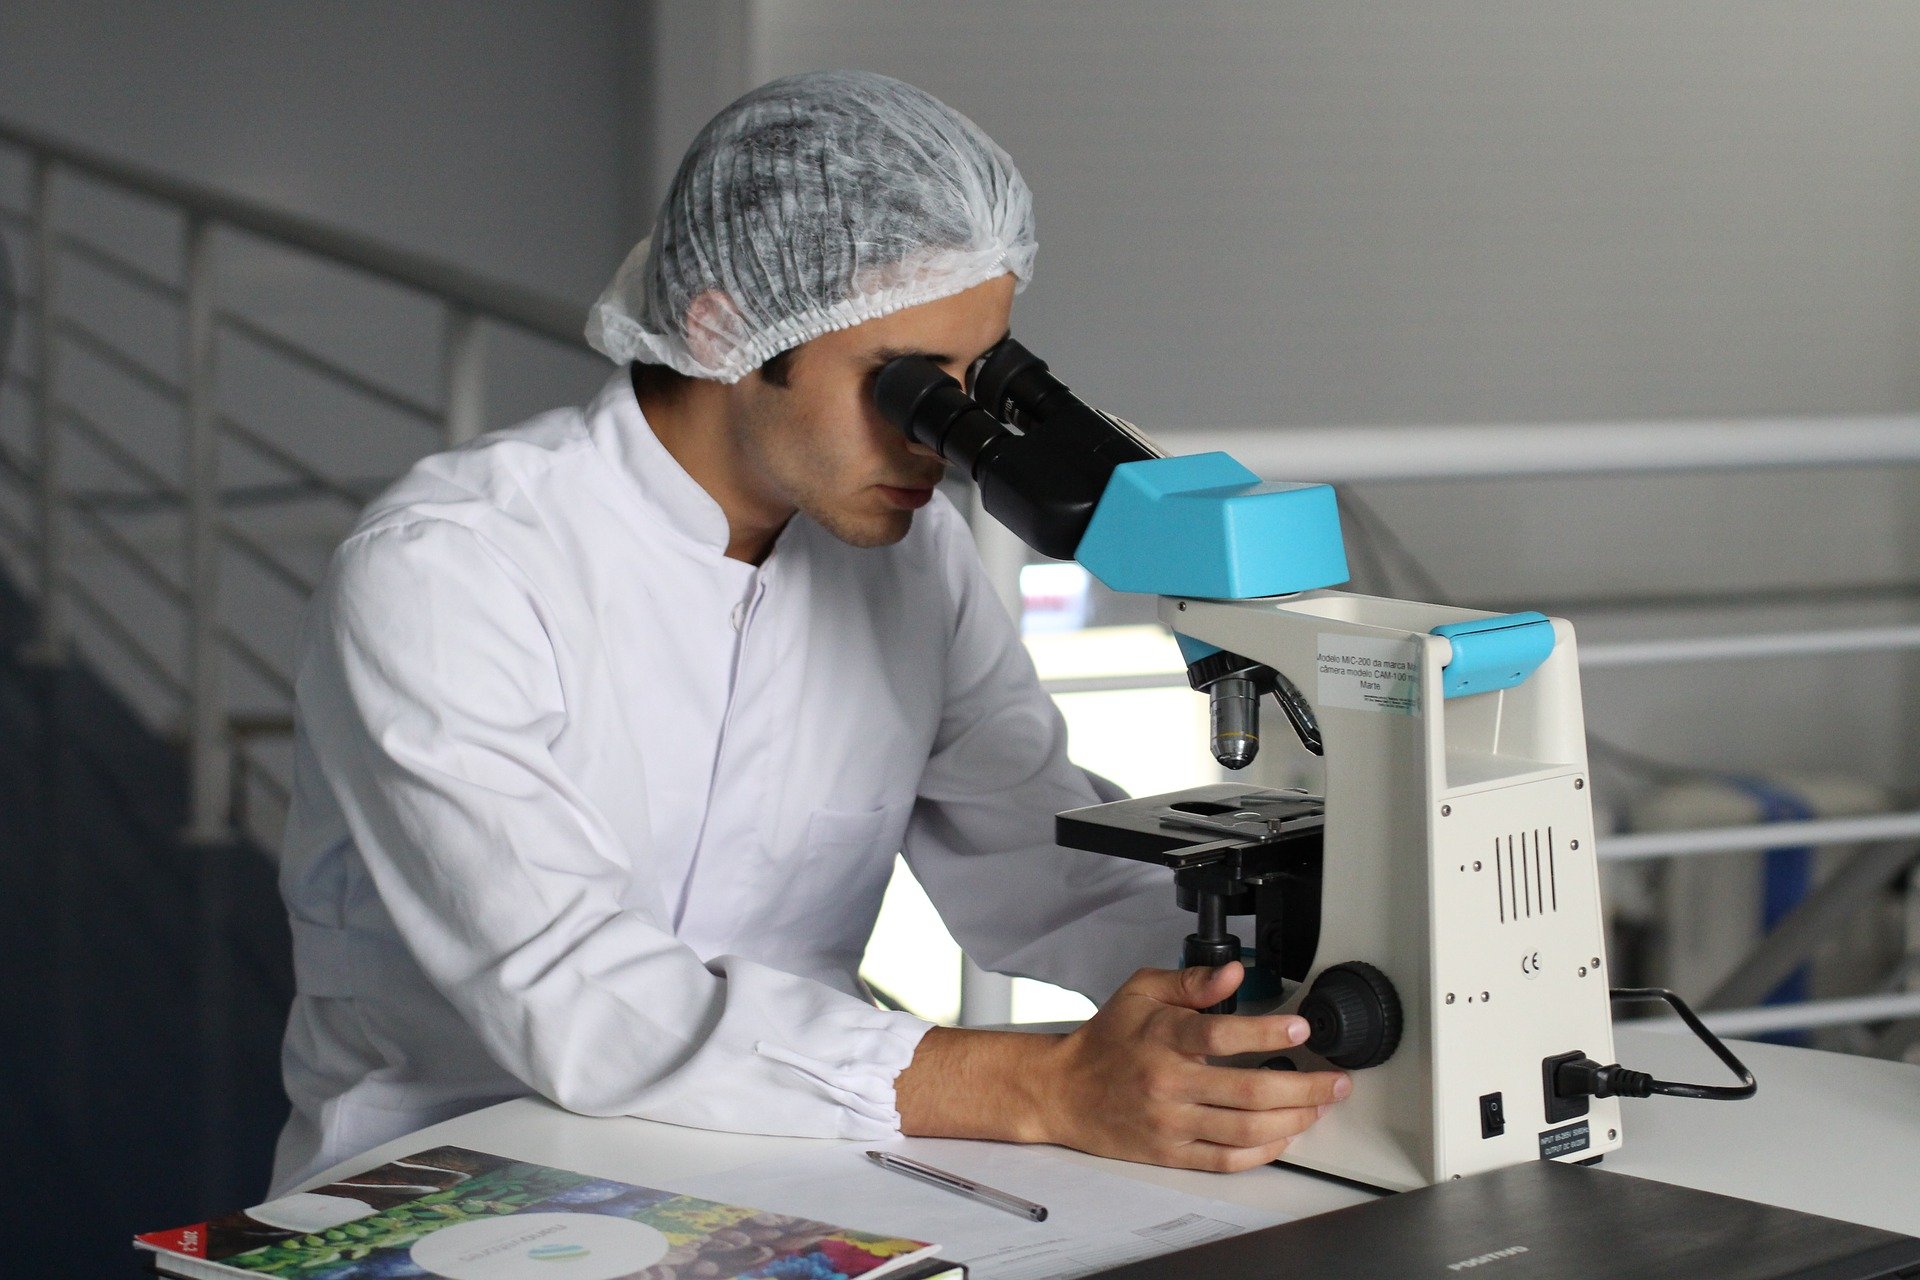 A scientist wearing their work scrubs while looking through a microscope | Photo: Pixabay/luvqs